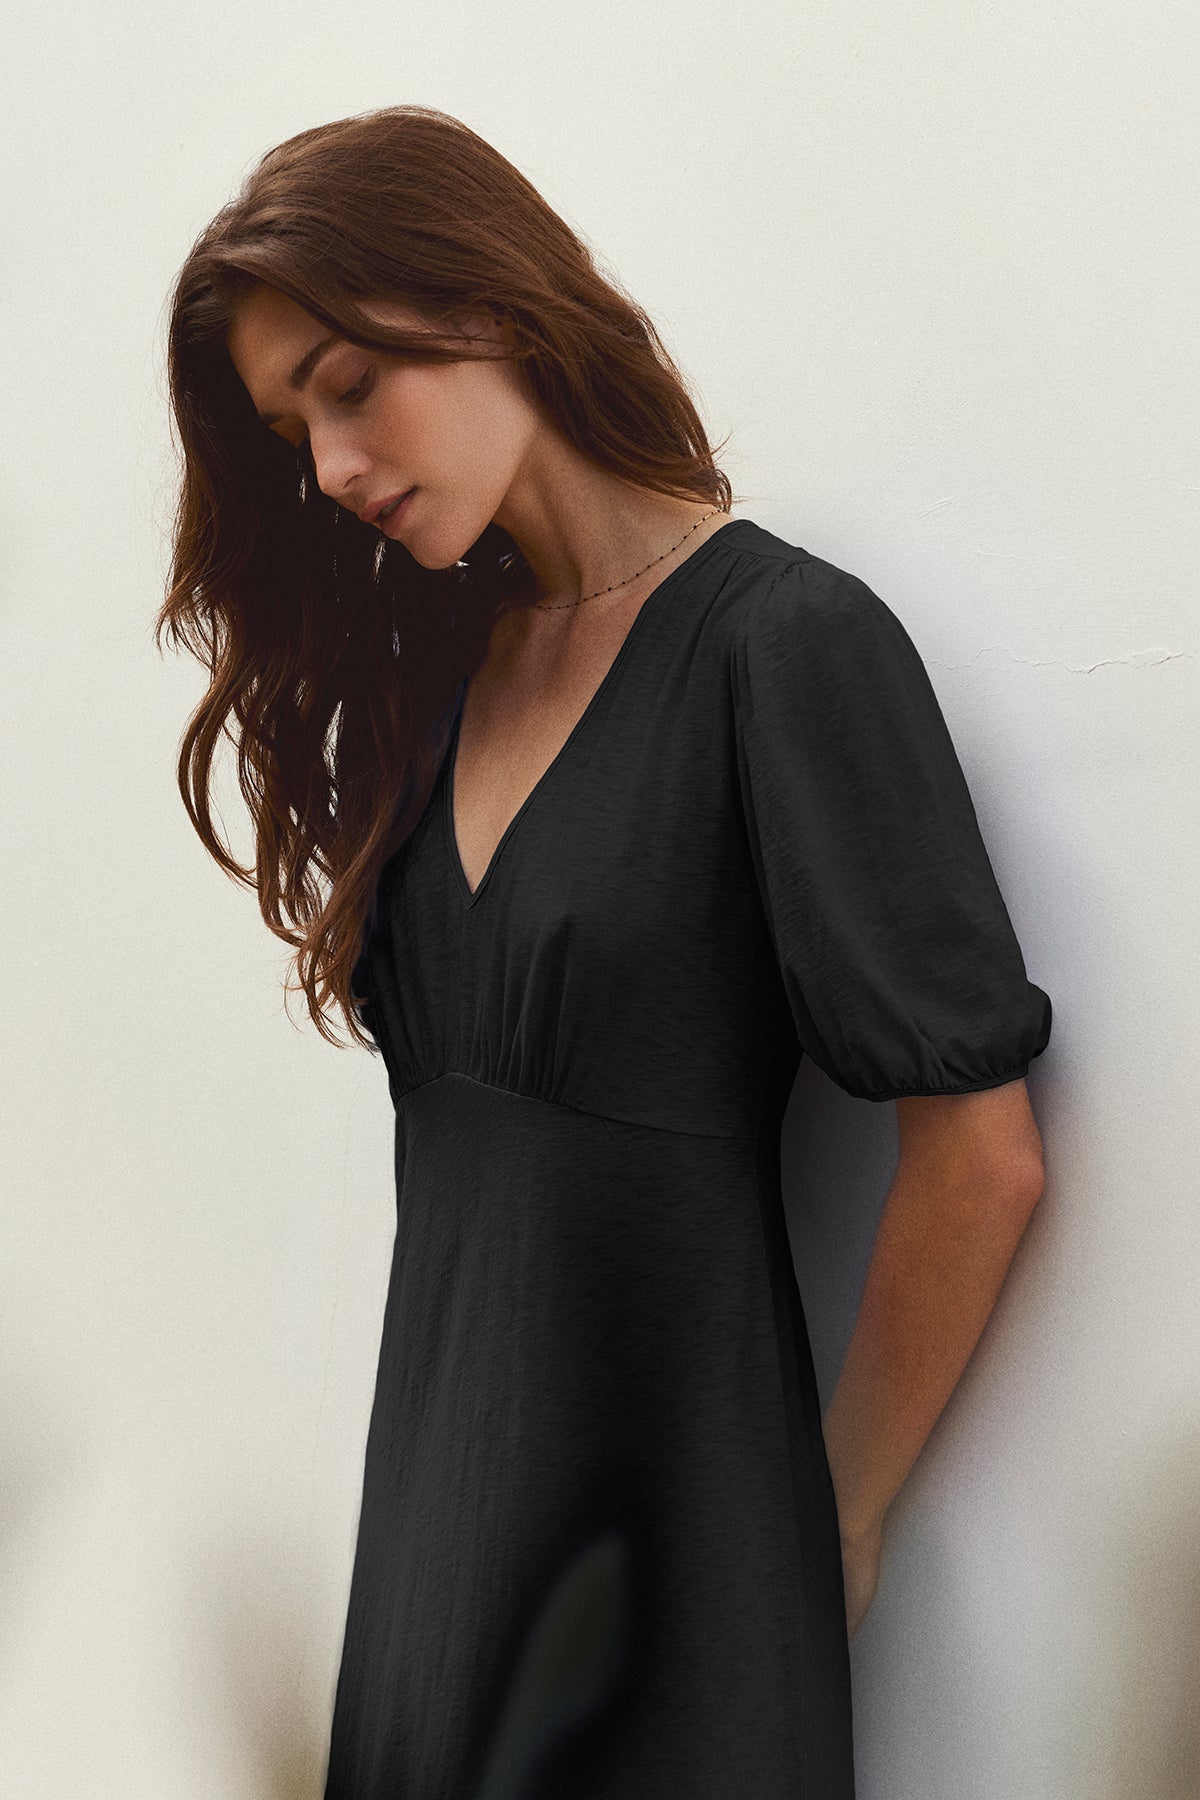   A woman with long brown hair wearing a black PARKER COTTON SLUB MIDI DRESS by Velvet by Graham & Spencer stands against a plain white wall, looking downwards. 